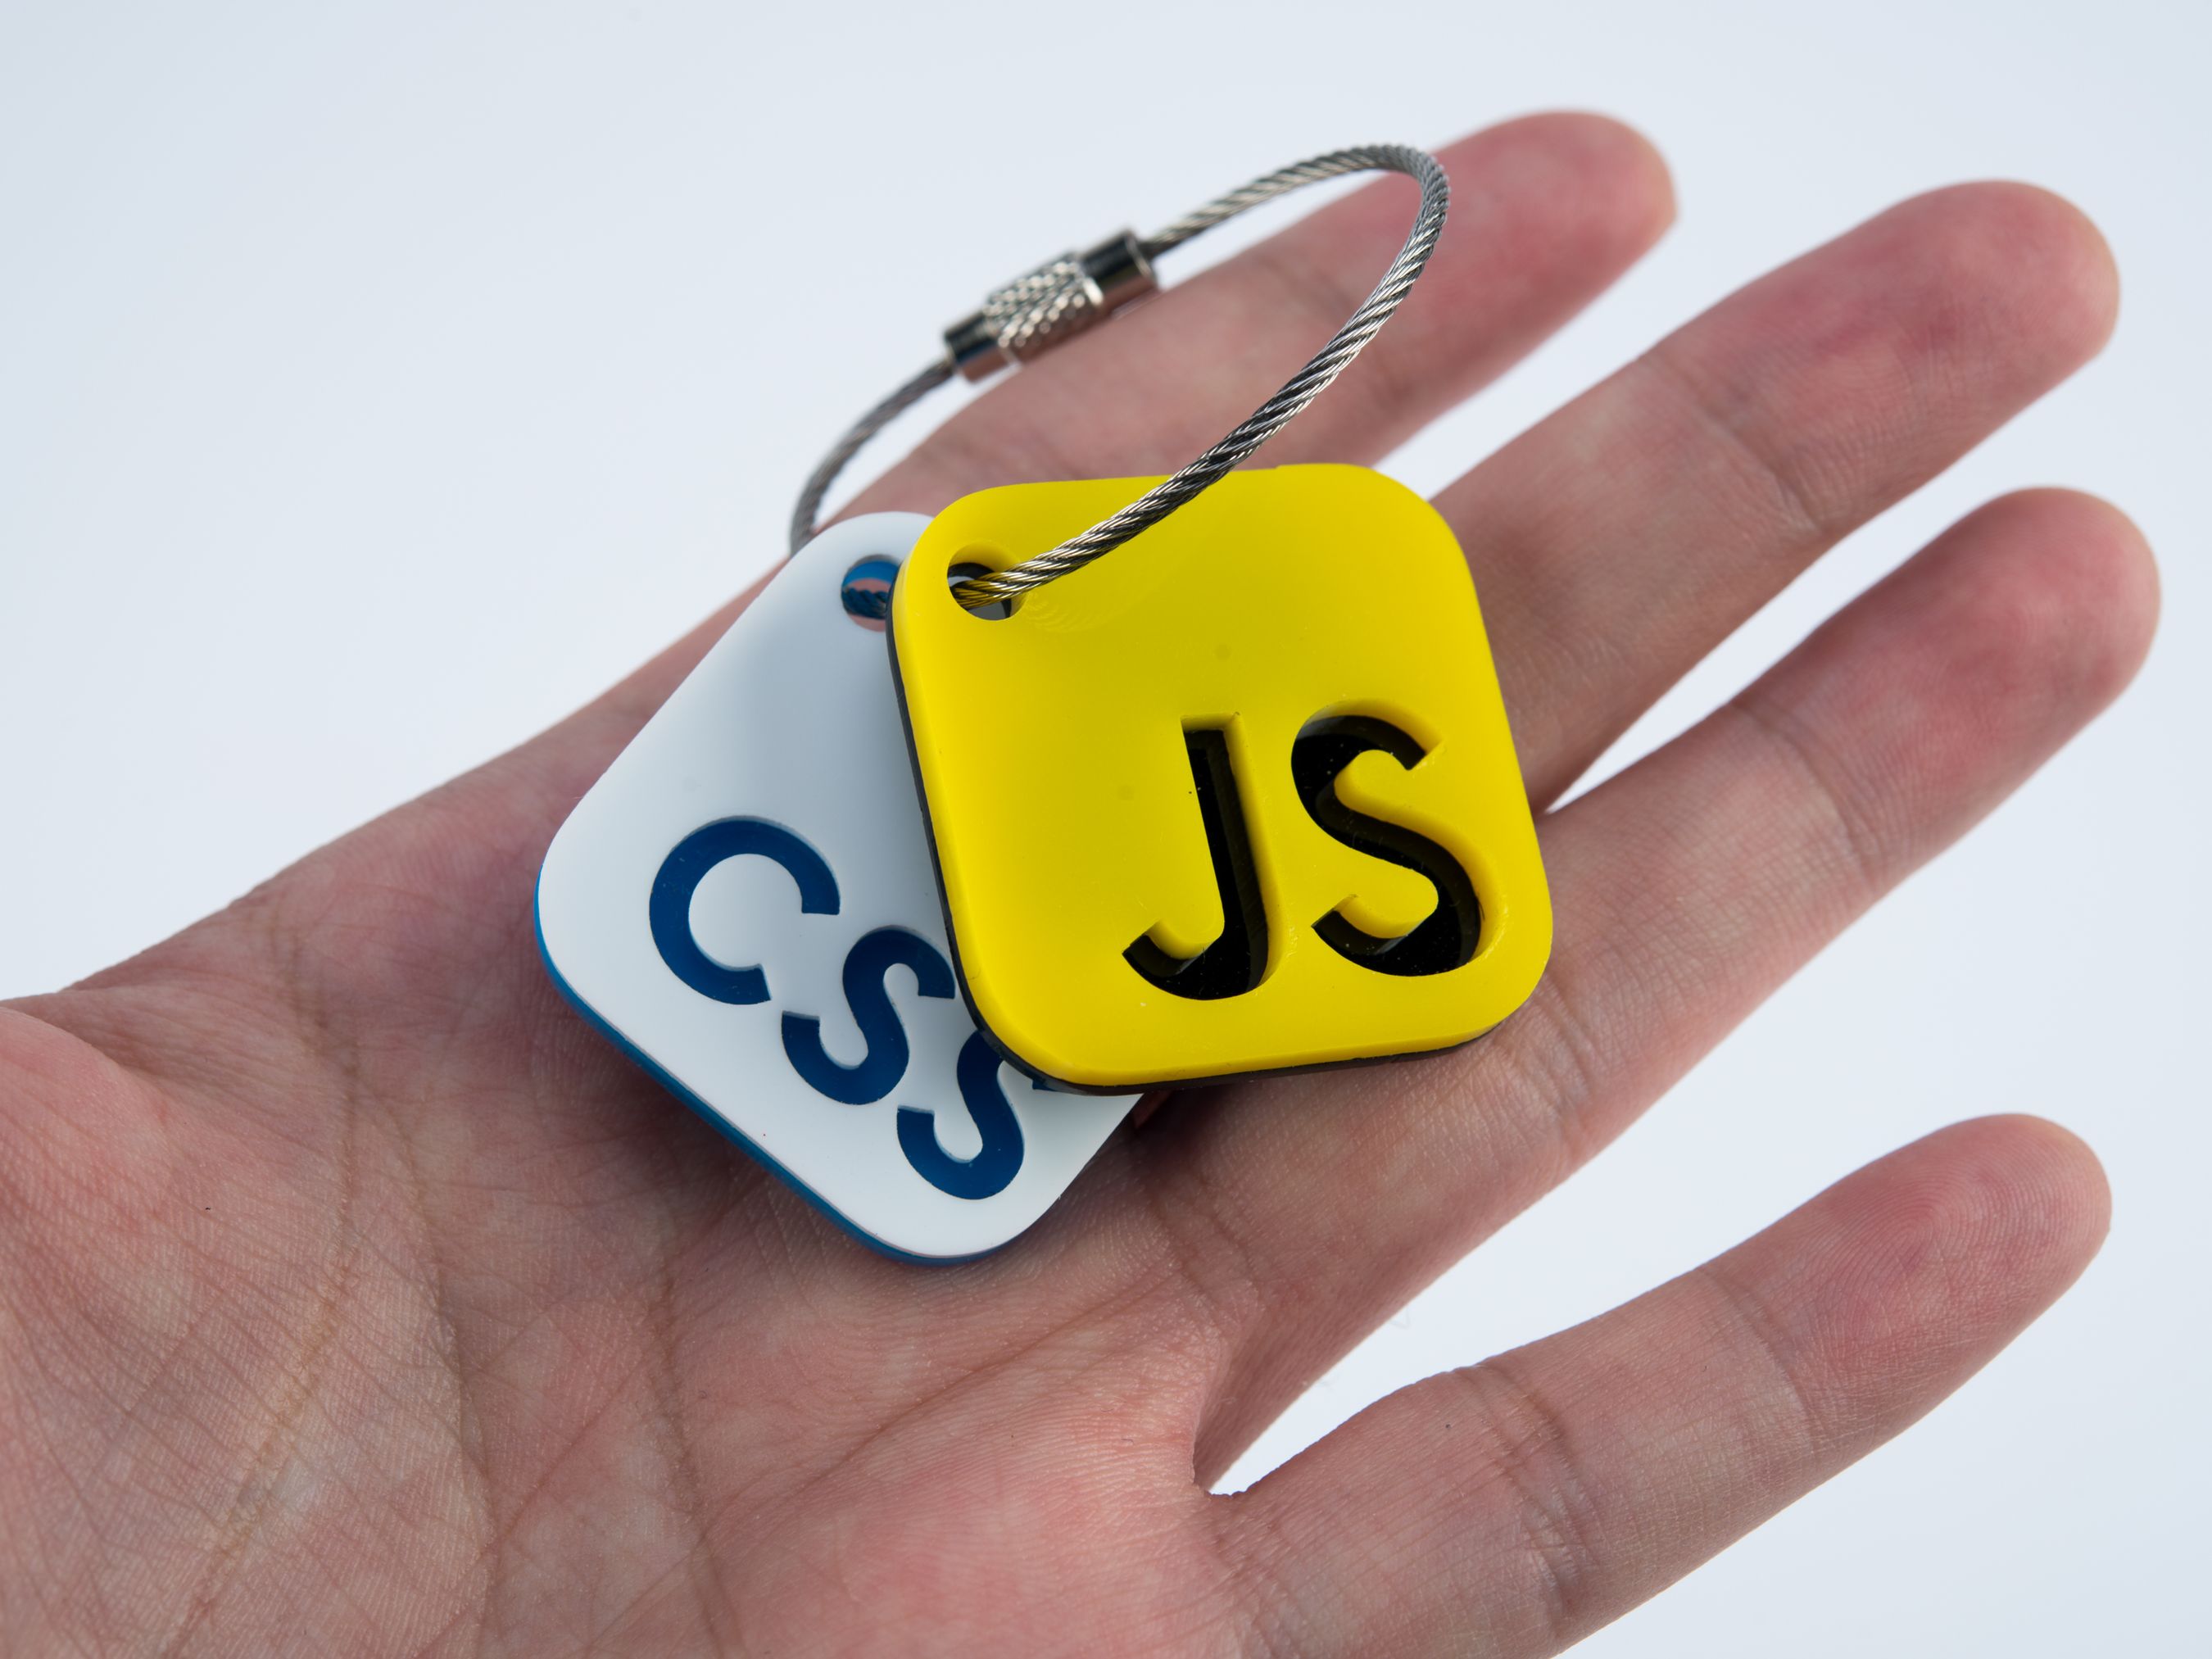 CSS and JavaScript Keychains on someone's hand